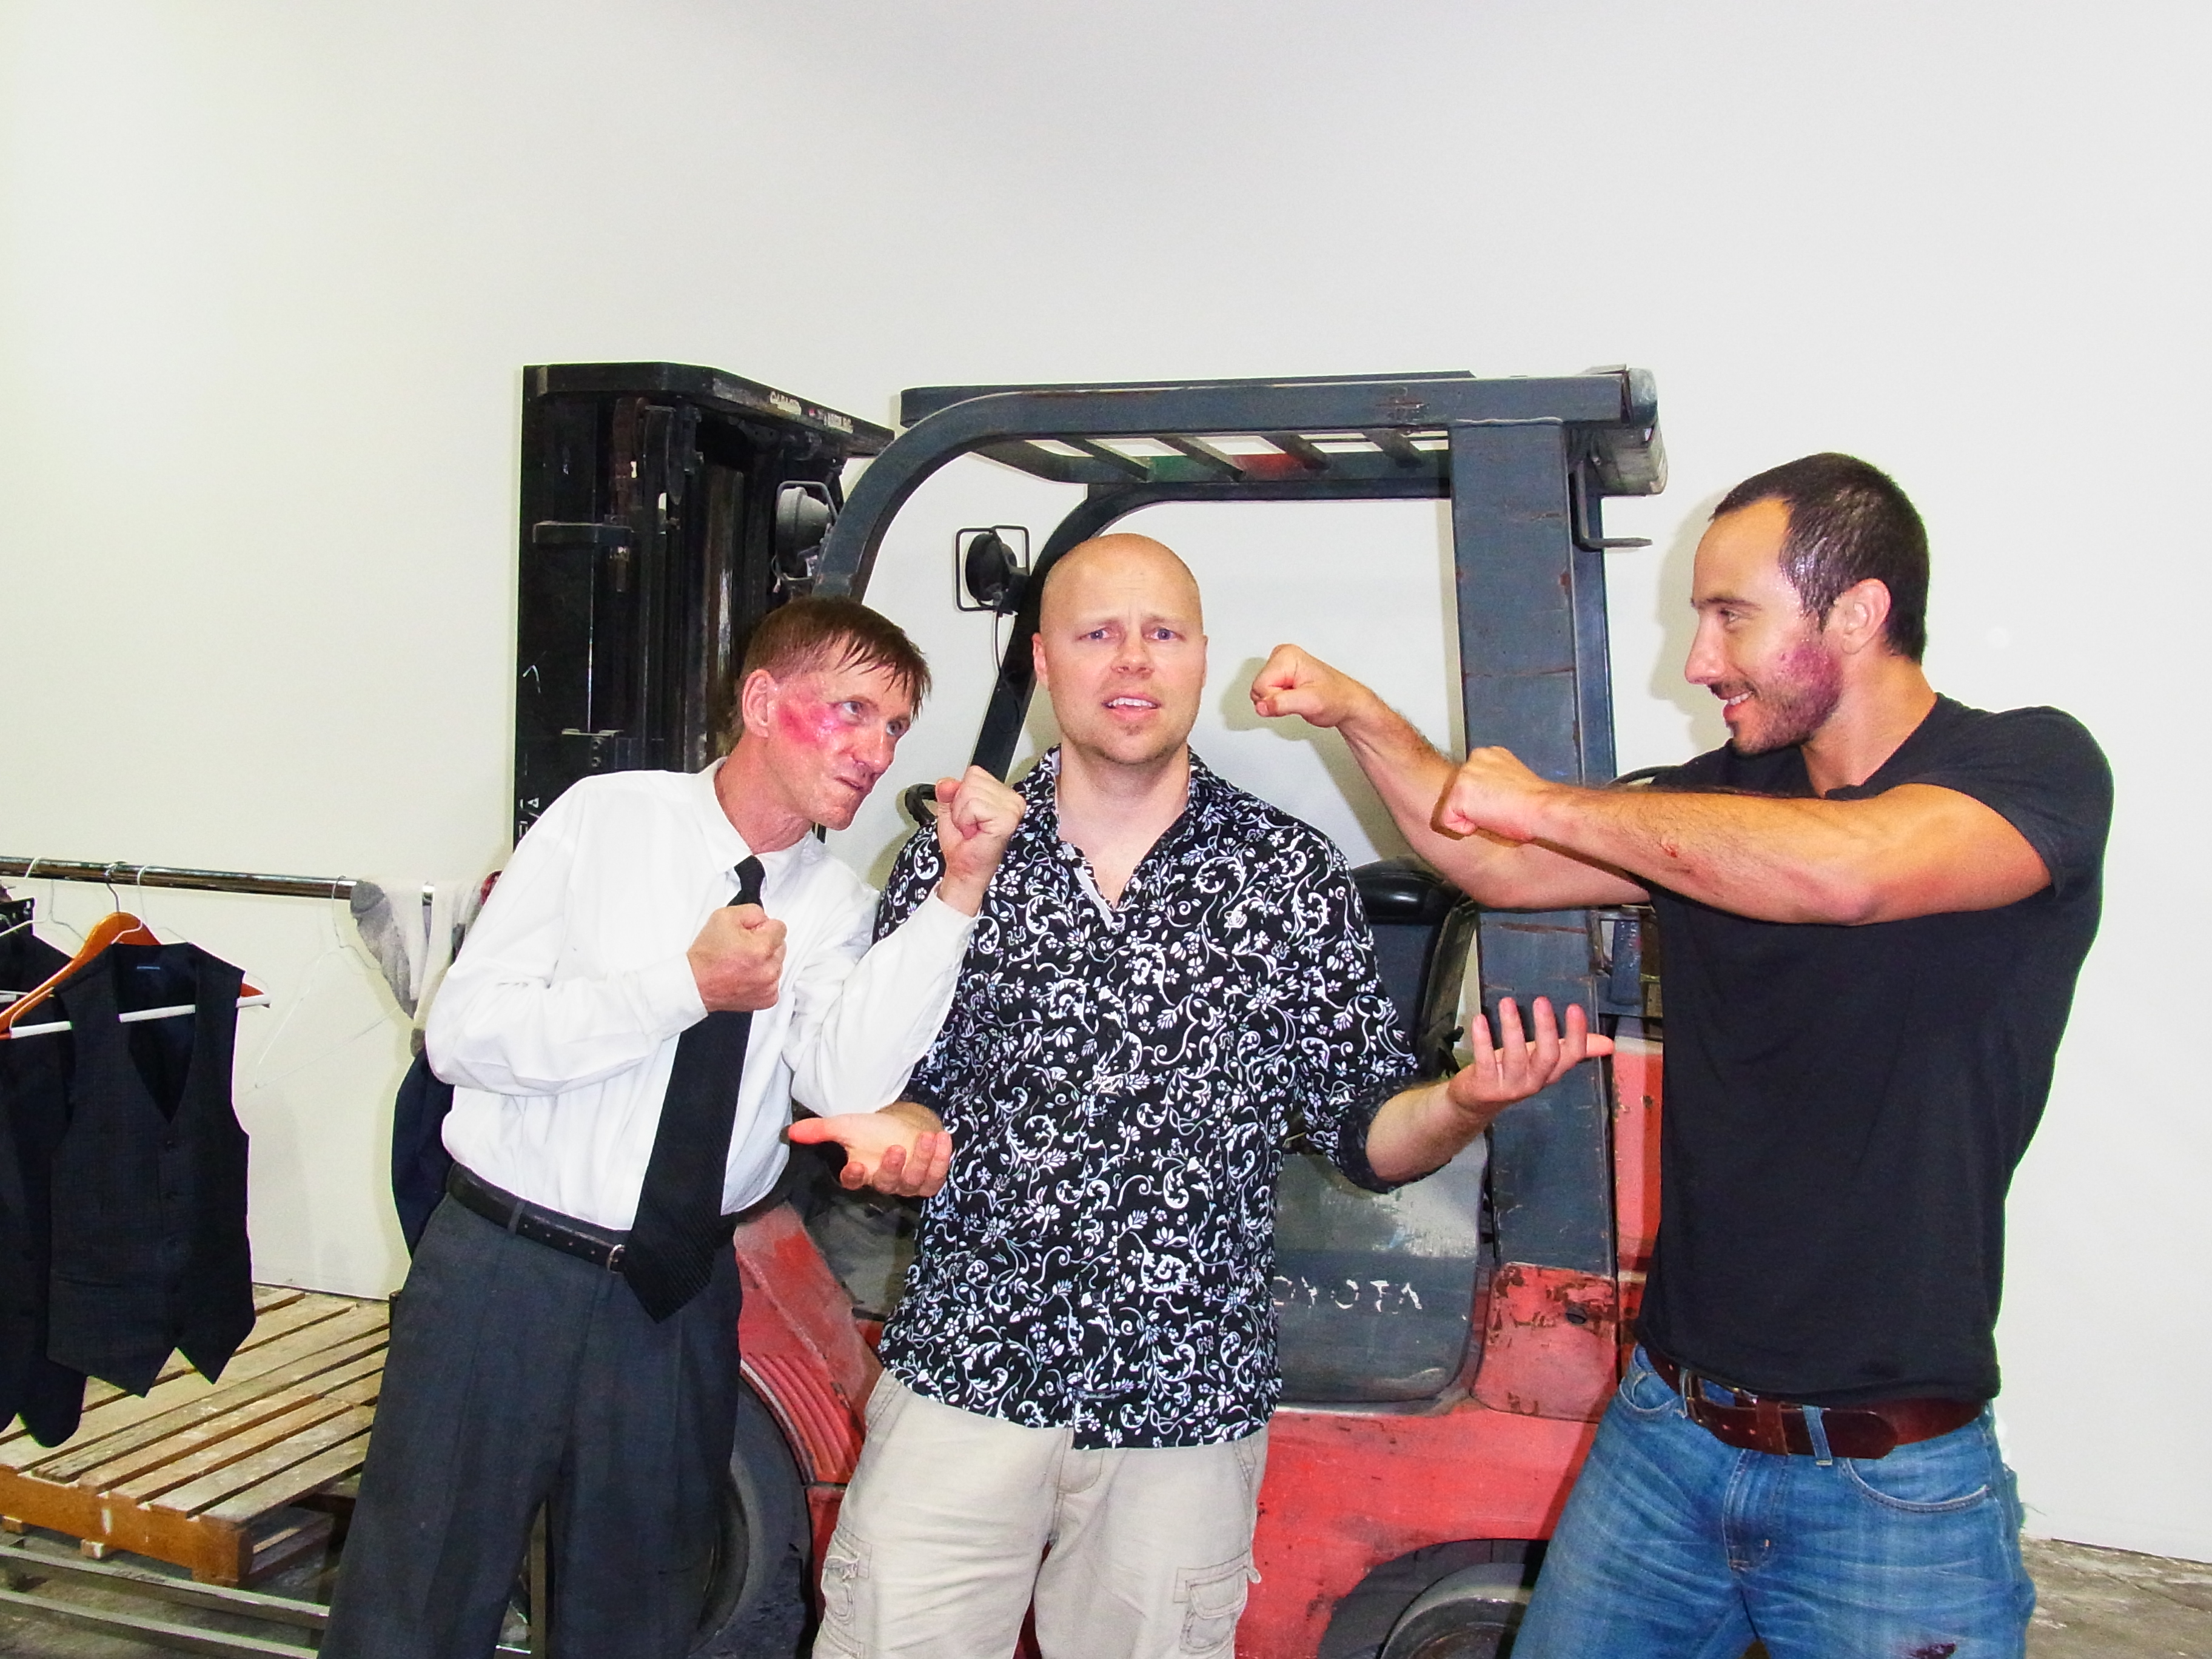 Bill Oberst Jr, Jon Smith, and Andre Tenerelli on the set of Assassins